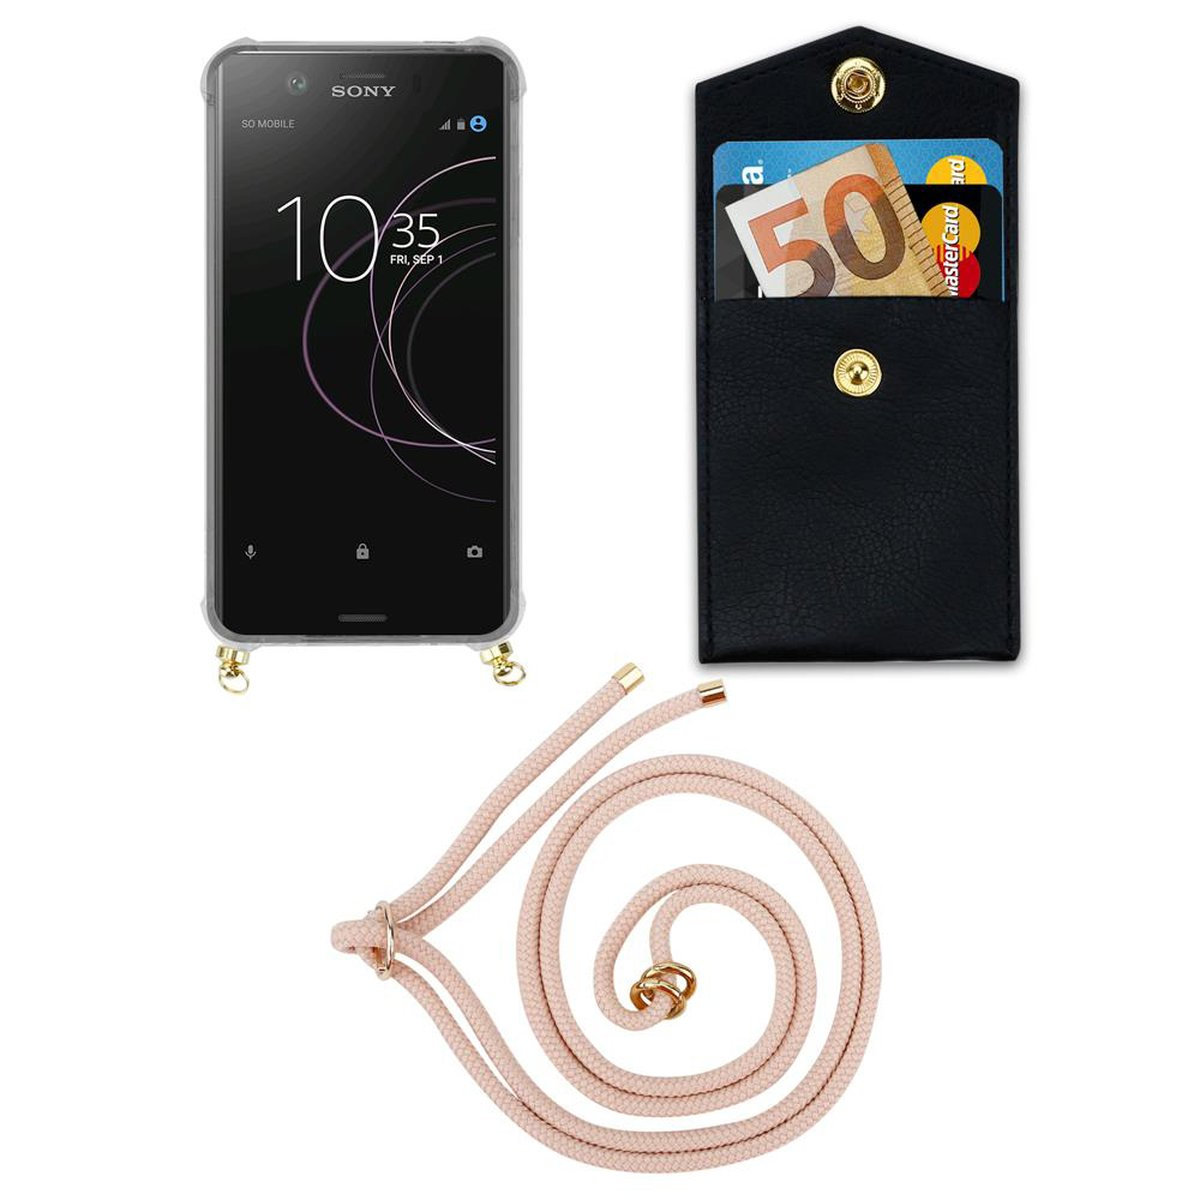 CADORABO Handy Kette mit Gold XZ1 PERLIG Ringen, COMPACT, und ROSÉGOLD Sony, abnehmbarer Band Xperia Backcover, Hülle, Kordel